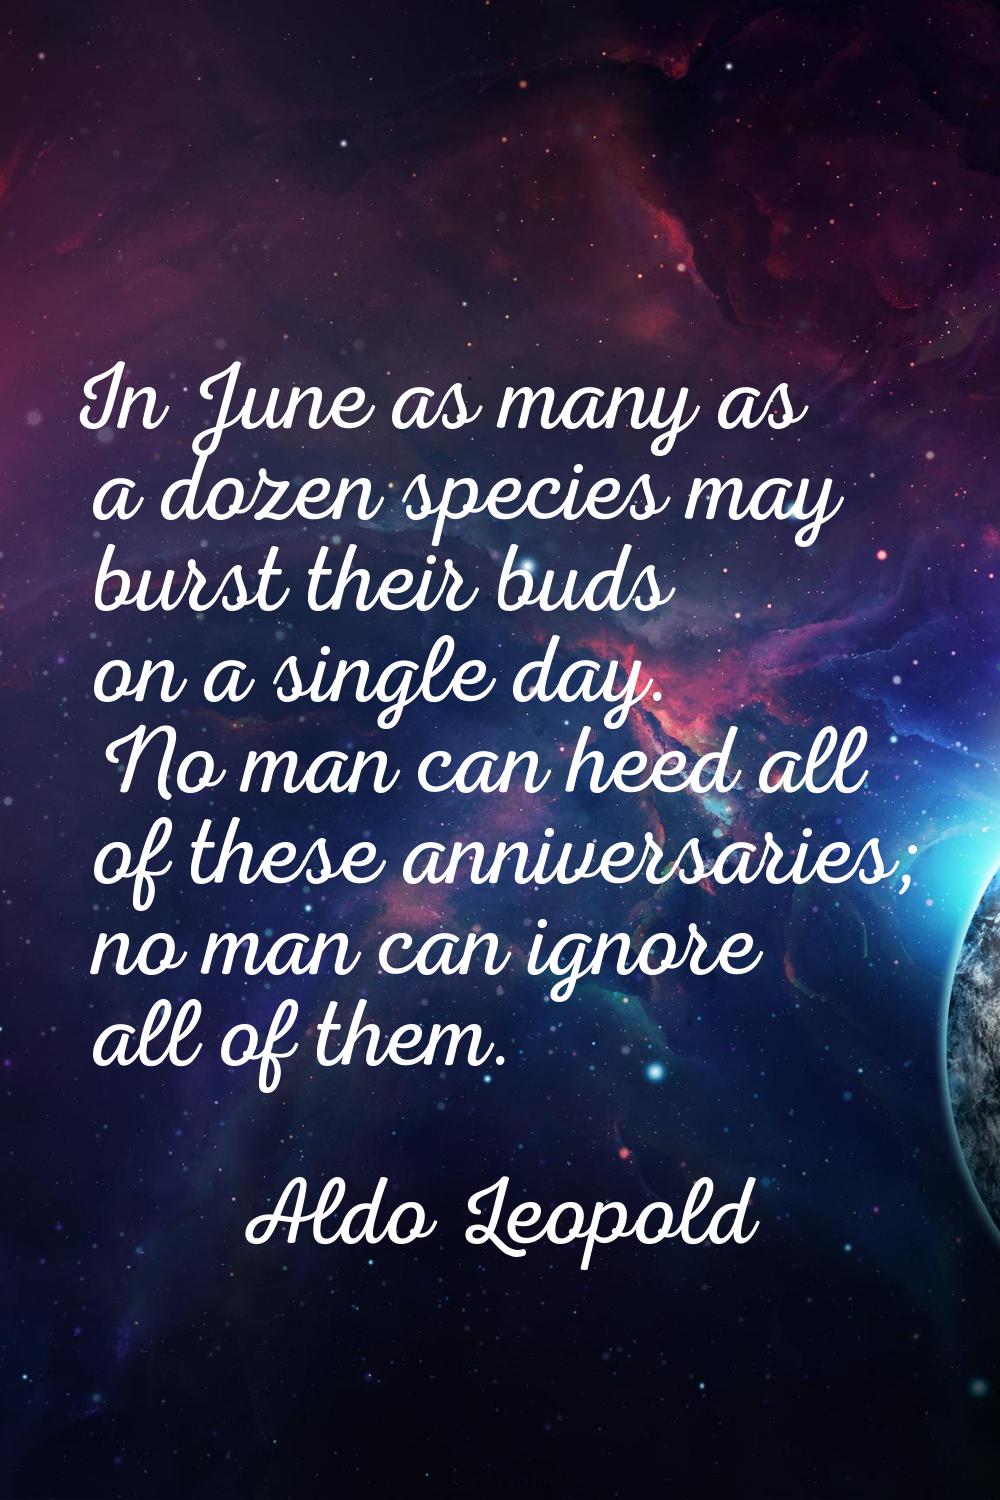 In June as many as a dozen species may burst their buds on a single day. No man can heed all of the